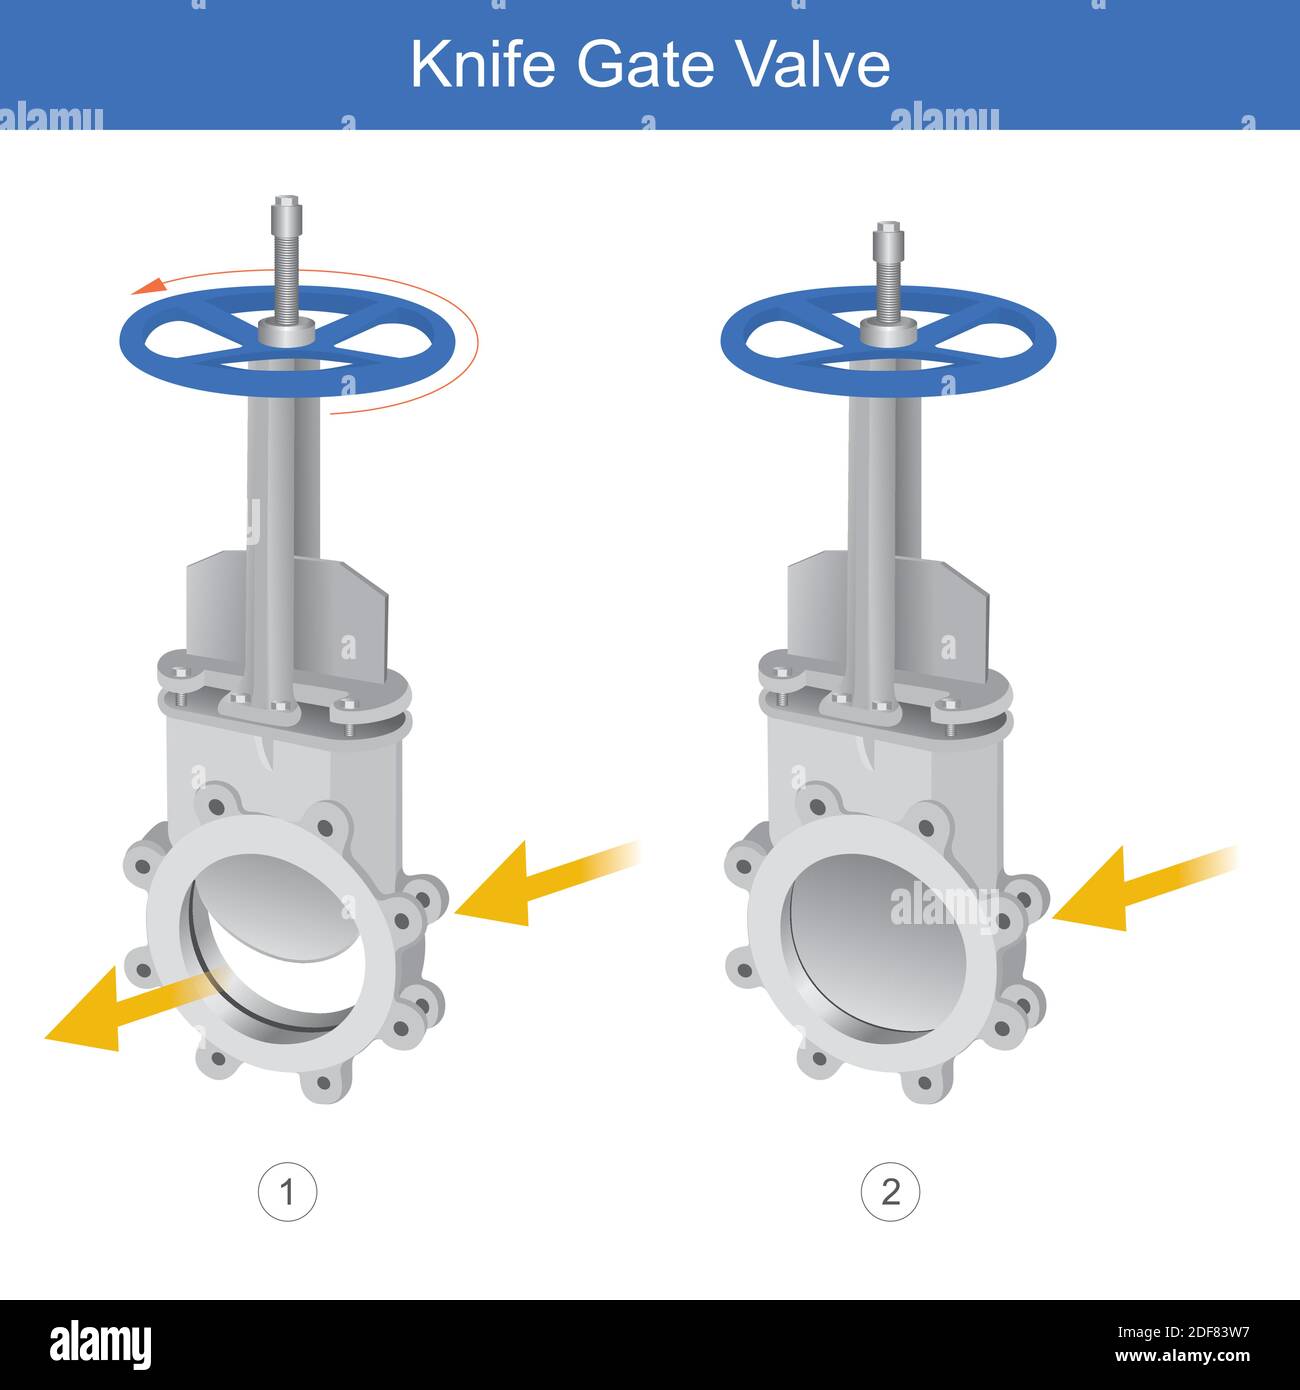 Knife Gate Valve. Illustration explain control instrument for oil and fluid it have volume include viscous. Stock Vector